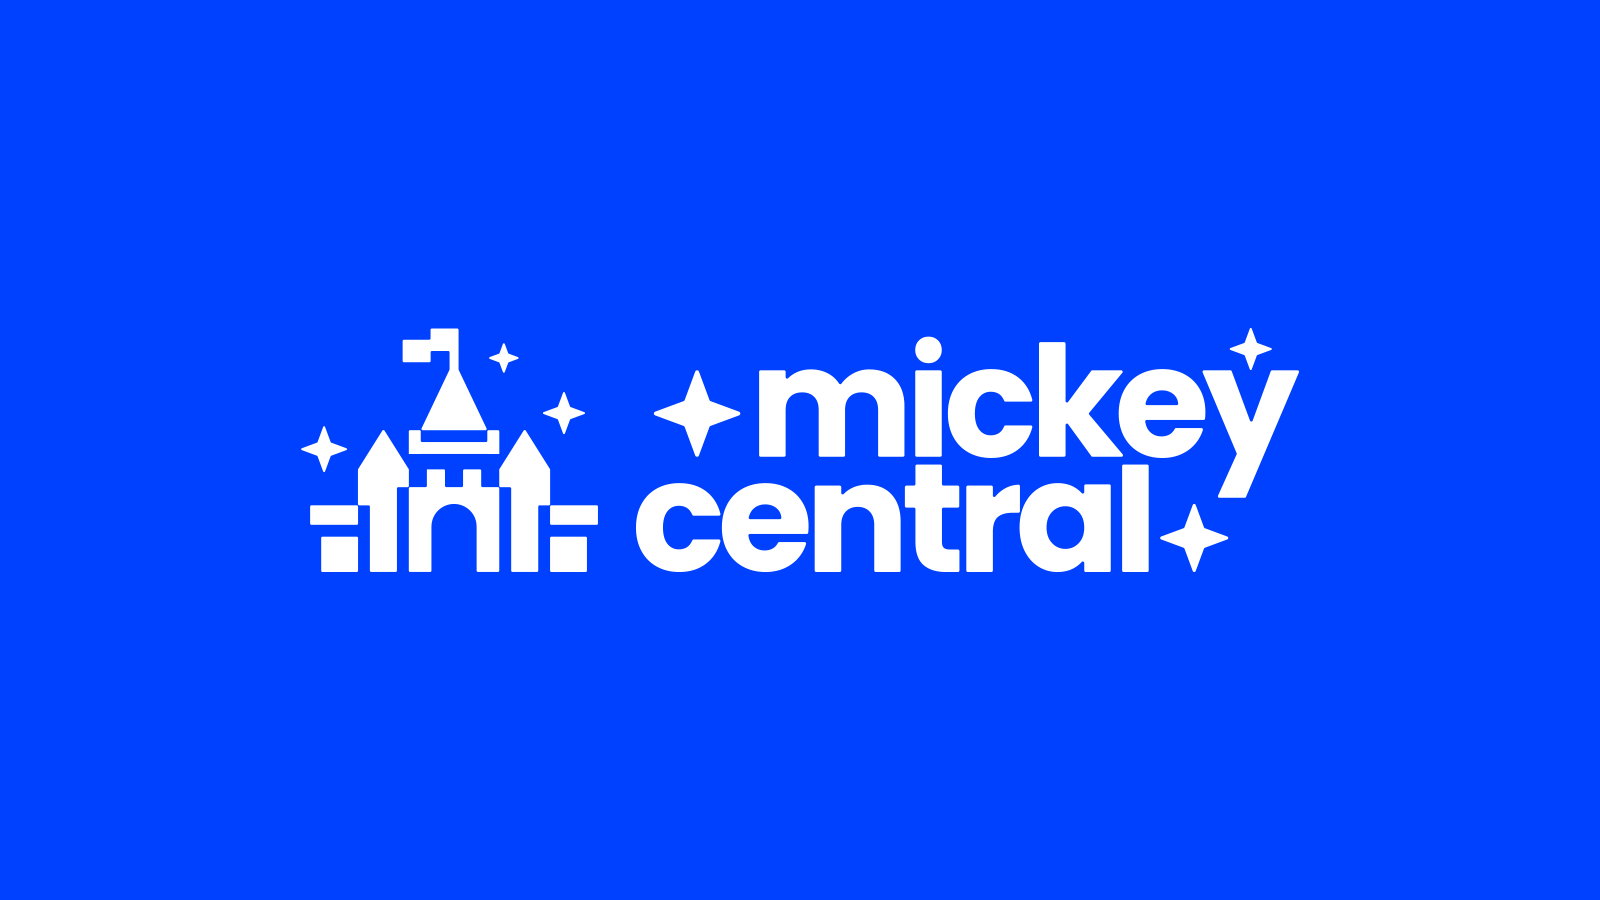 Mickey Central Is Getting a Fresh New Look!